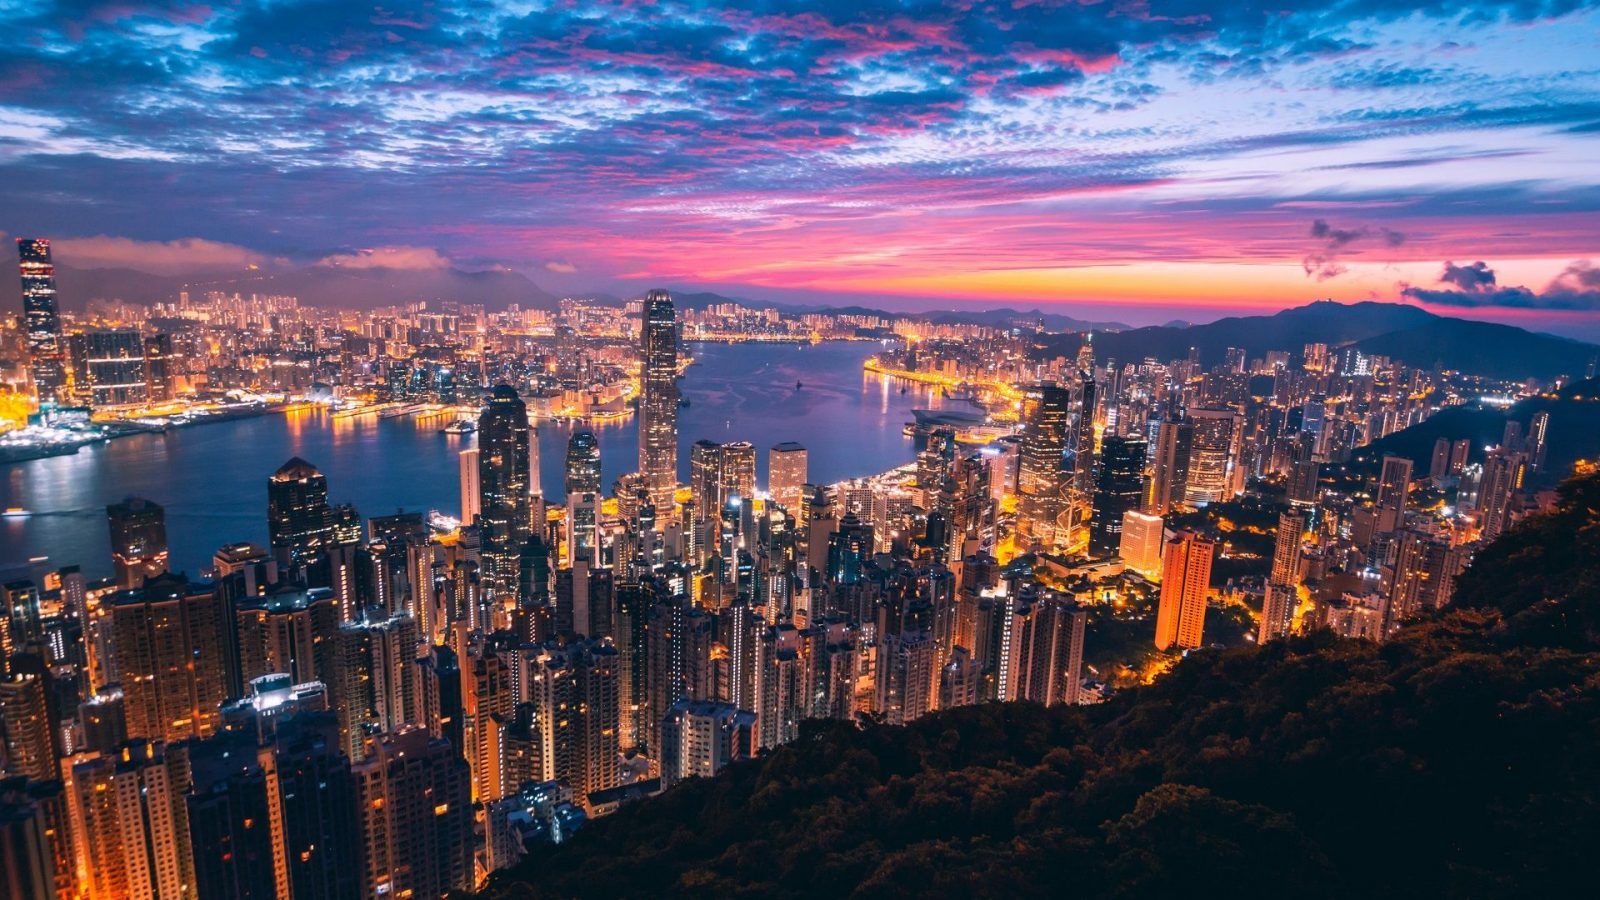 THINGS TO KNOW BEFORE YOU GO TO HONG KONG